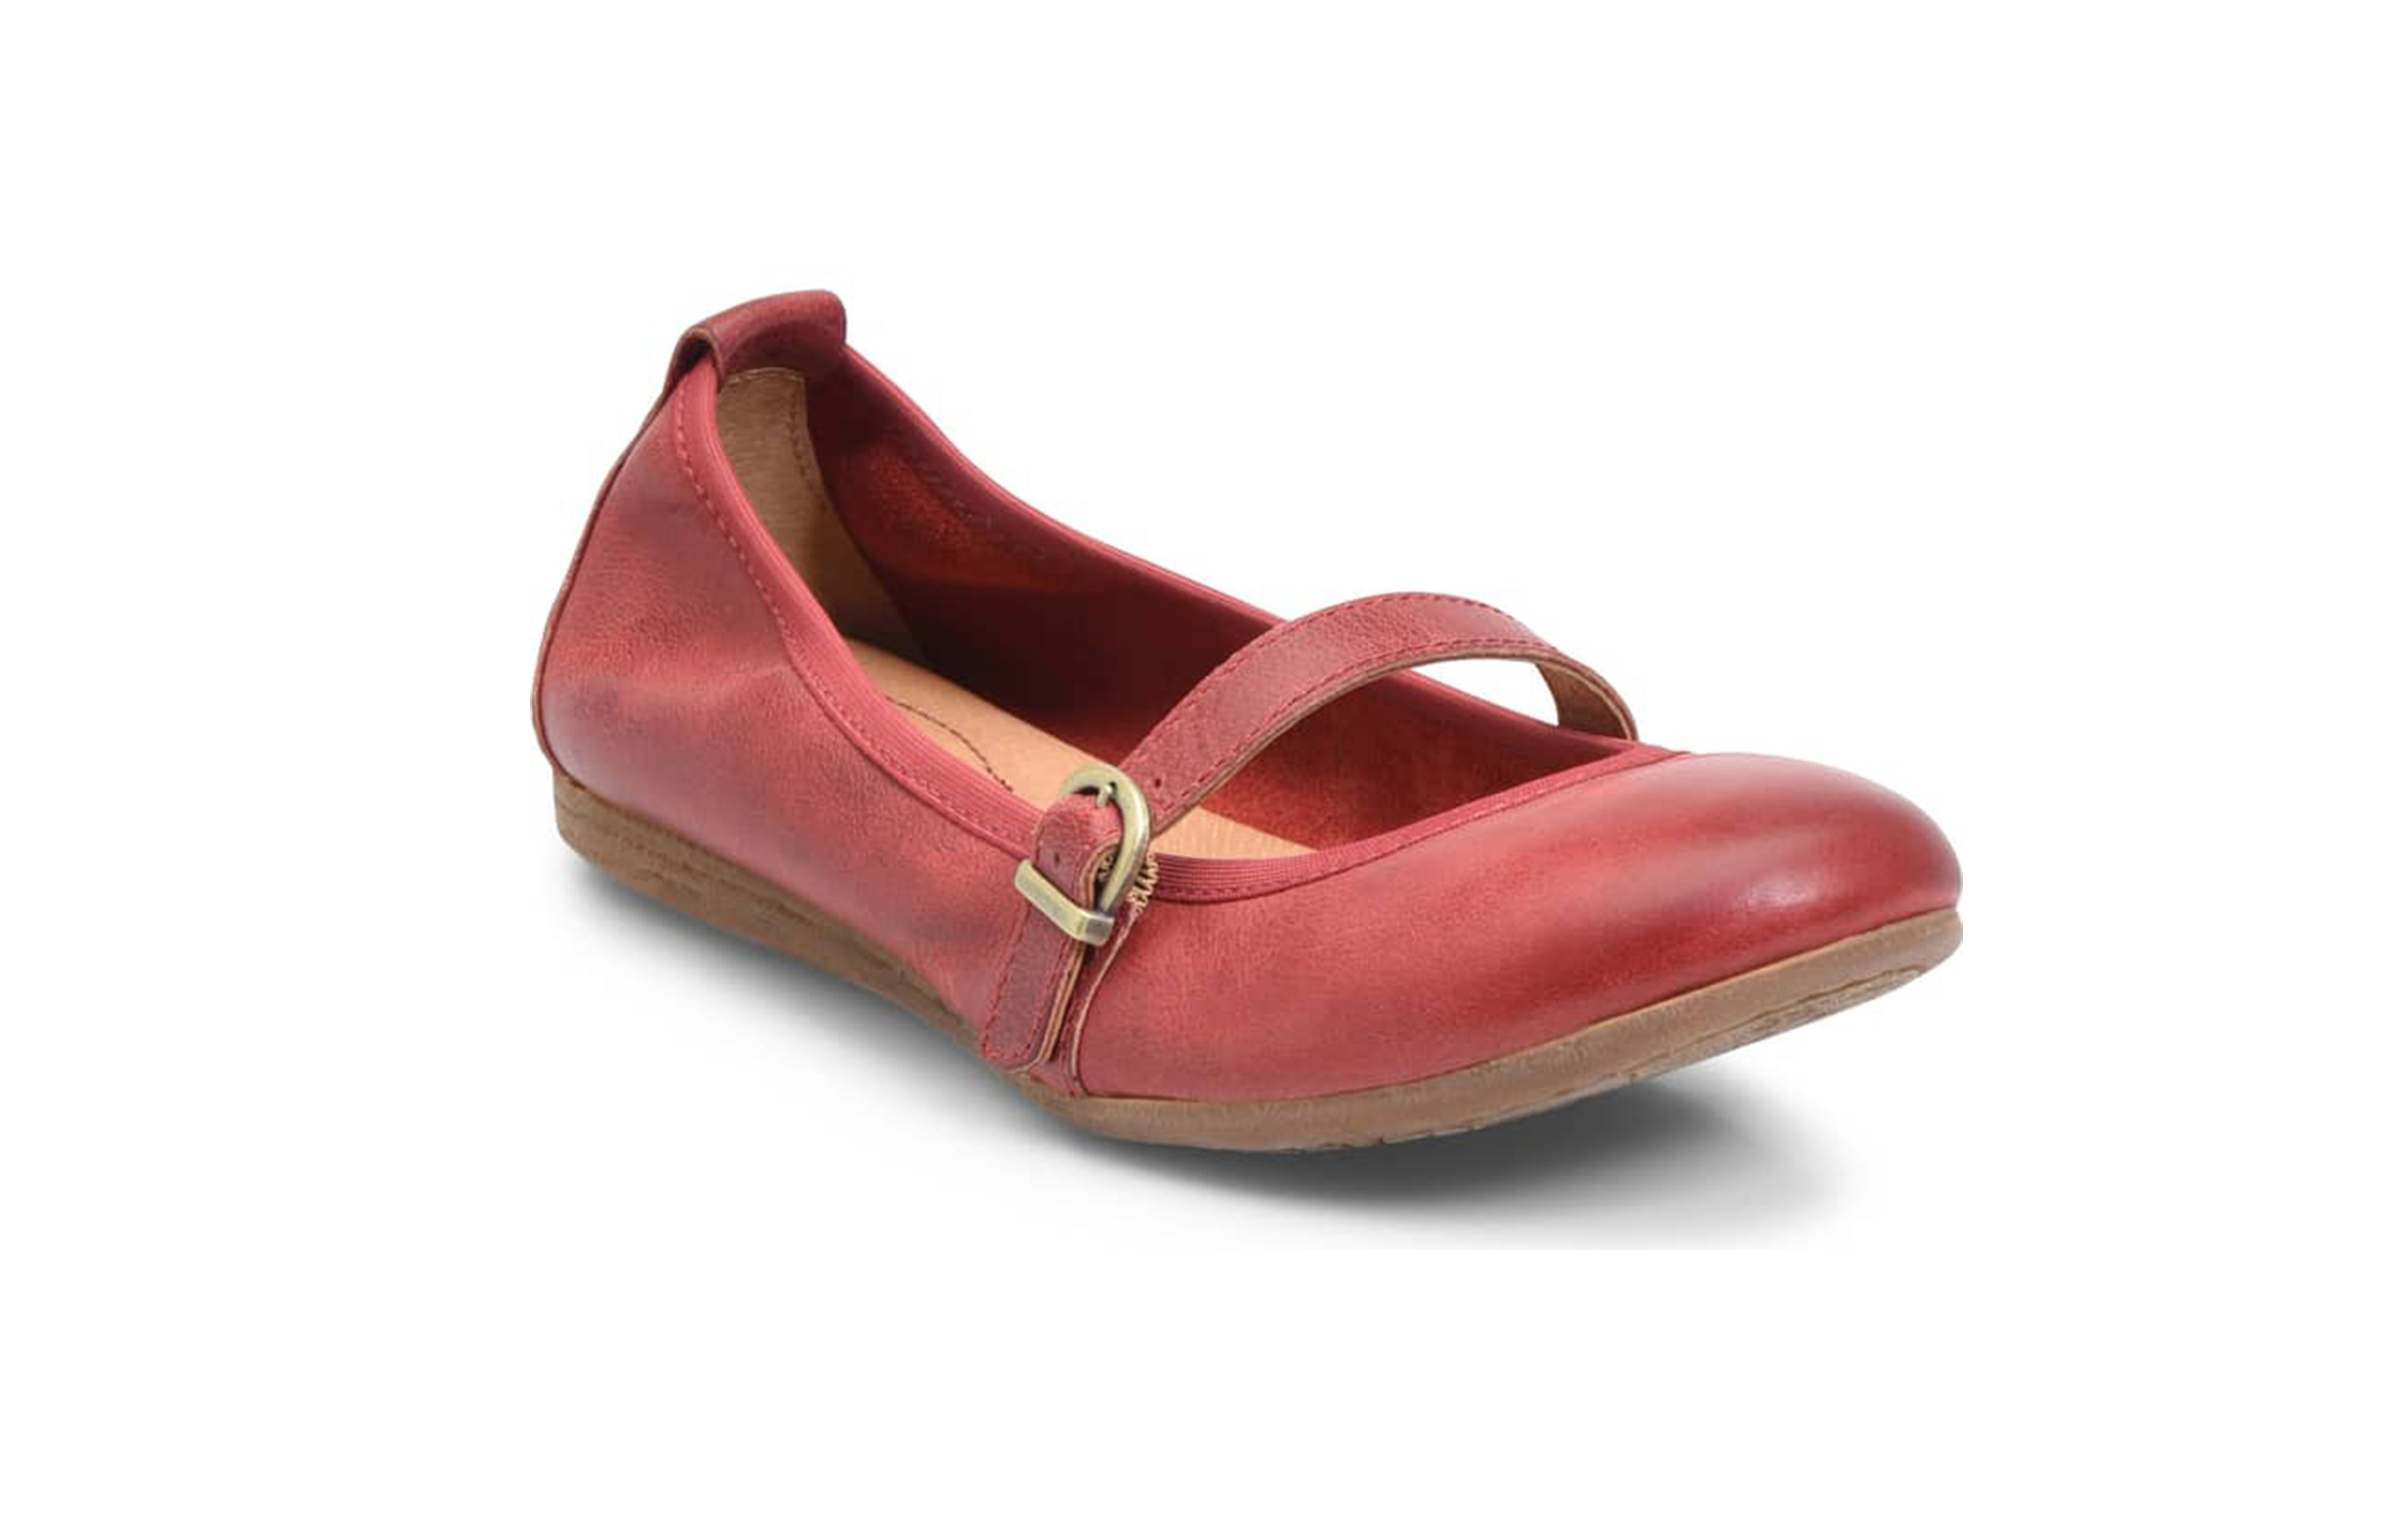 born curlew mary jane flats